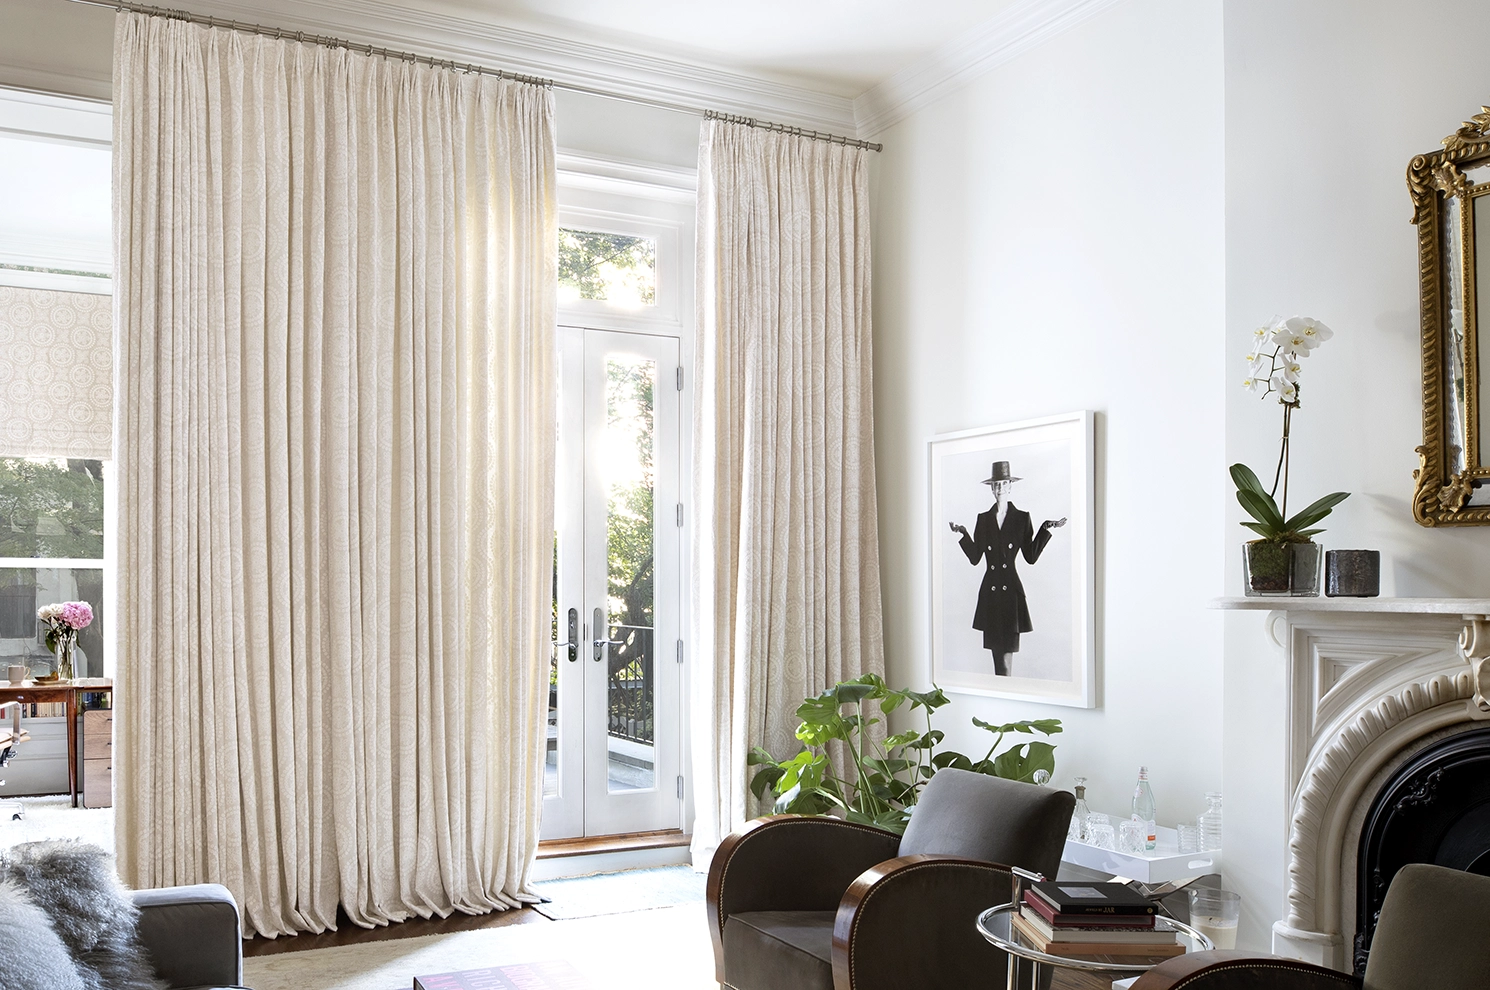 Cream curtains cover a wall of French doors in a chic and modern living room.